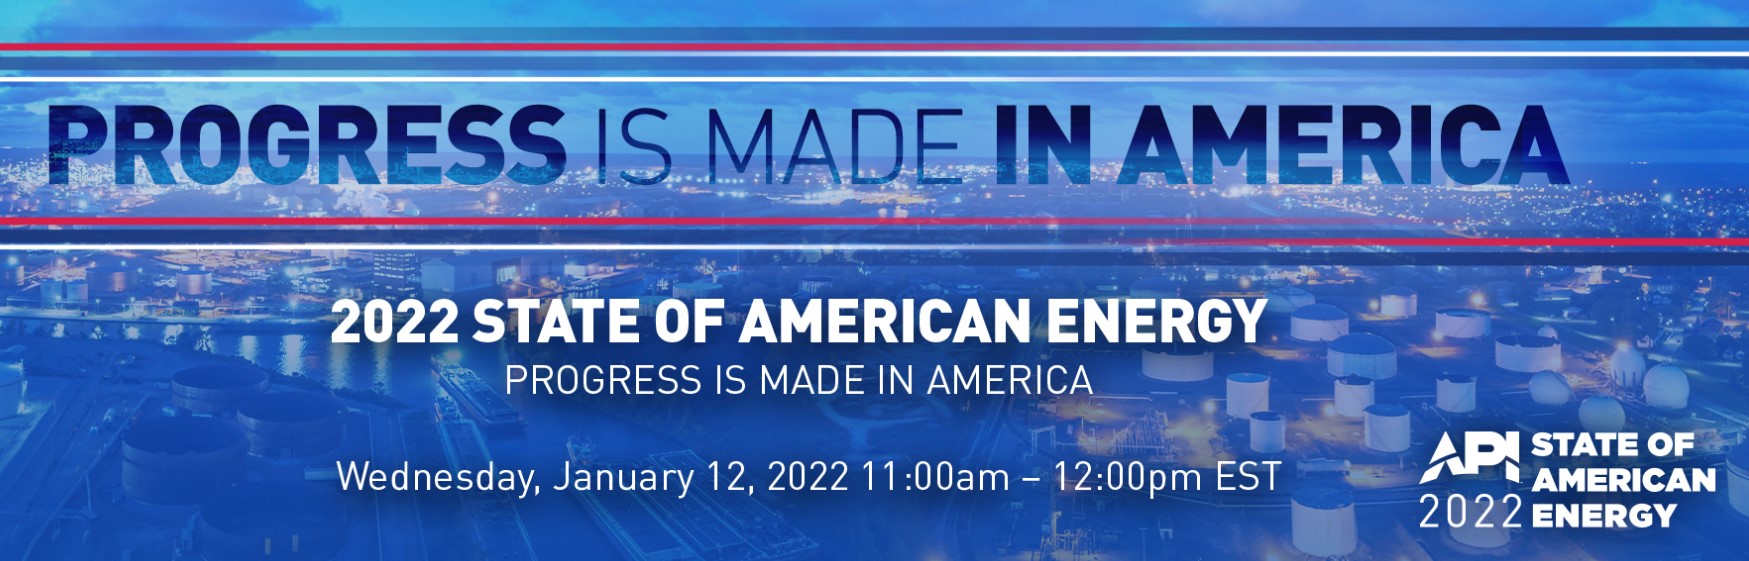 Made In America 2022 Schedule Api | State Of American Energy 2022 Sets Up The Year's Policy Discussion